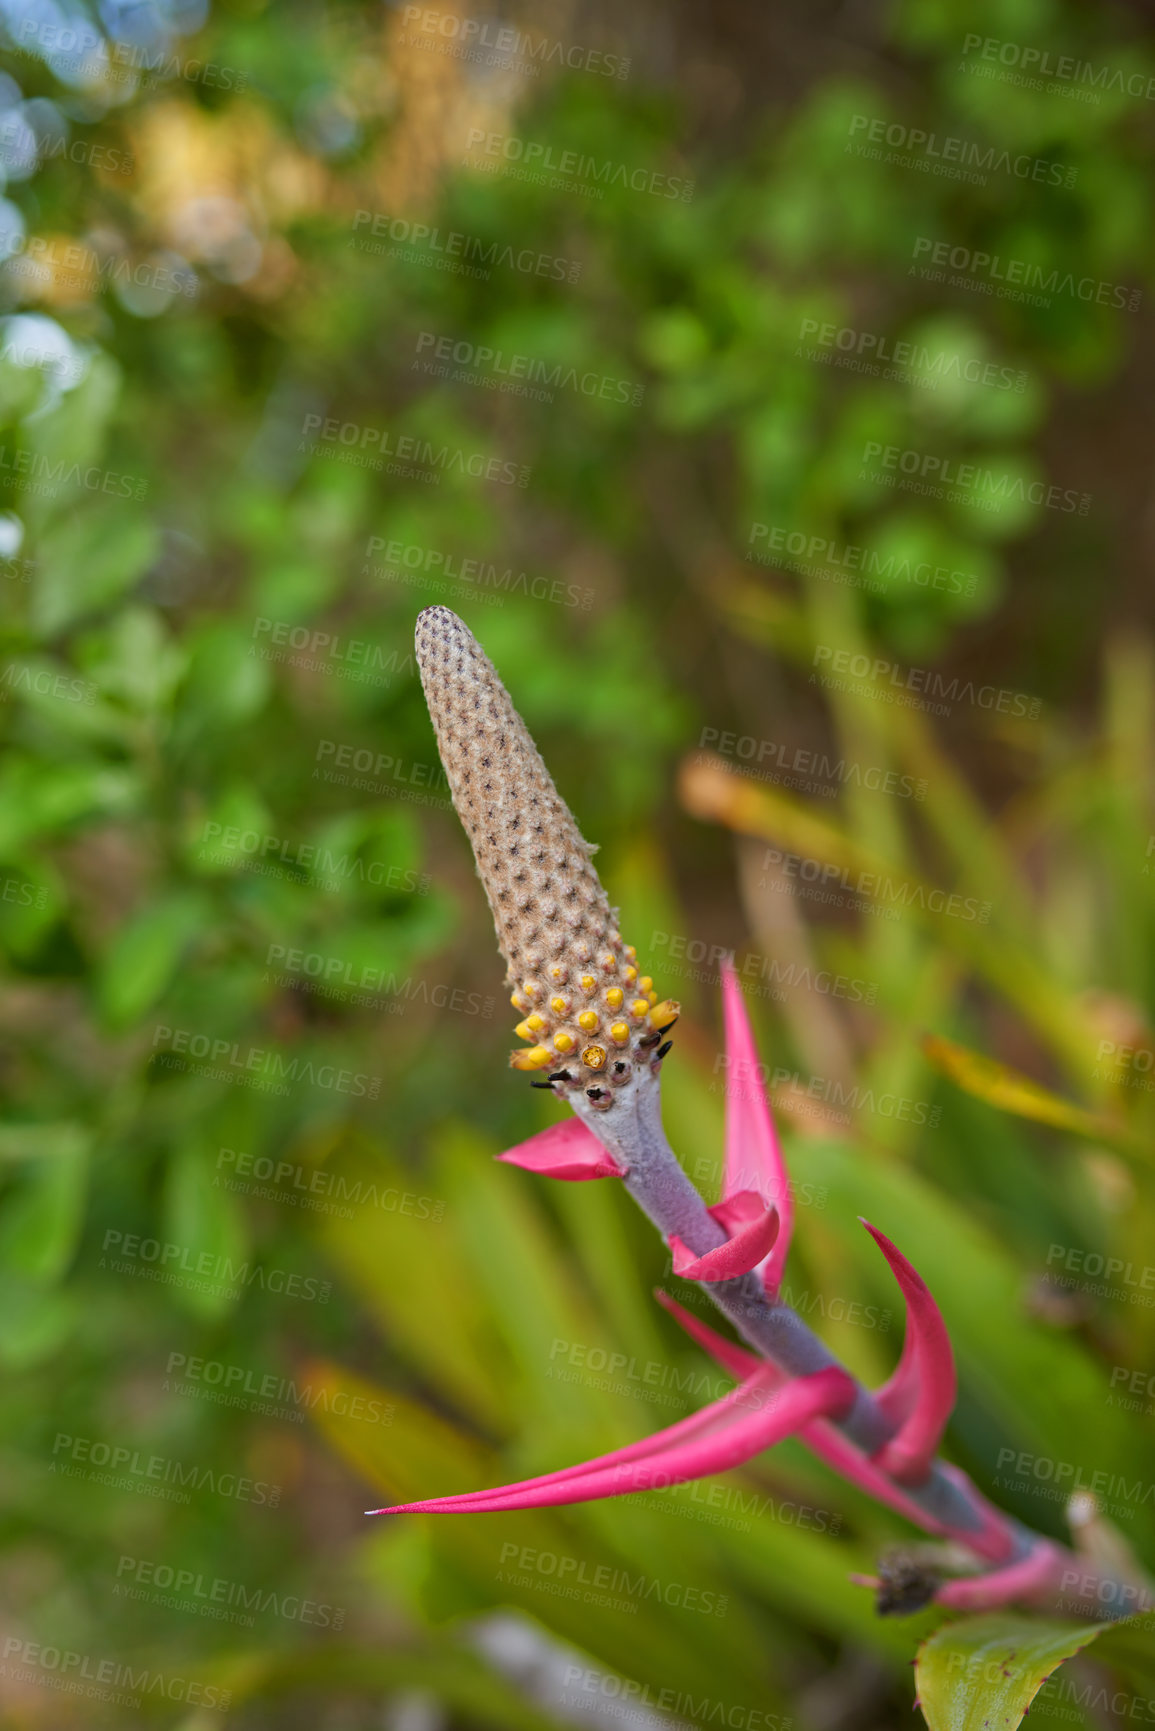 Buy stock photo Aechmea bromeliifolia plant growing in a garden or field outdoors. Closeup of beautiful flowering plants from the bromeliads species blooming and blossoming in nature during a sunny day in spring